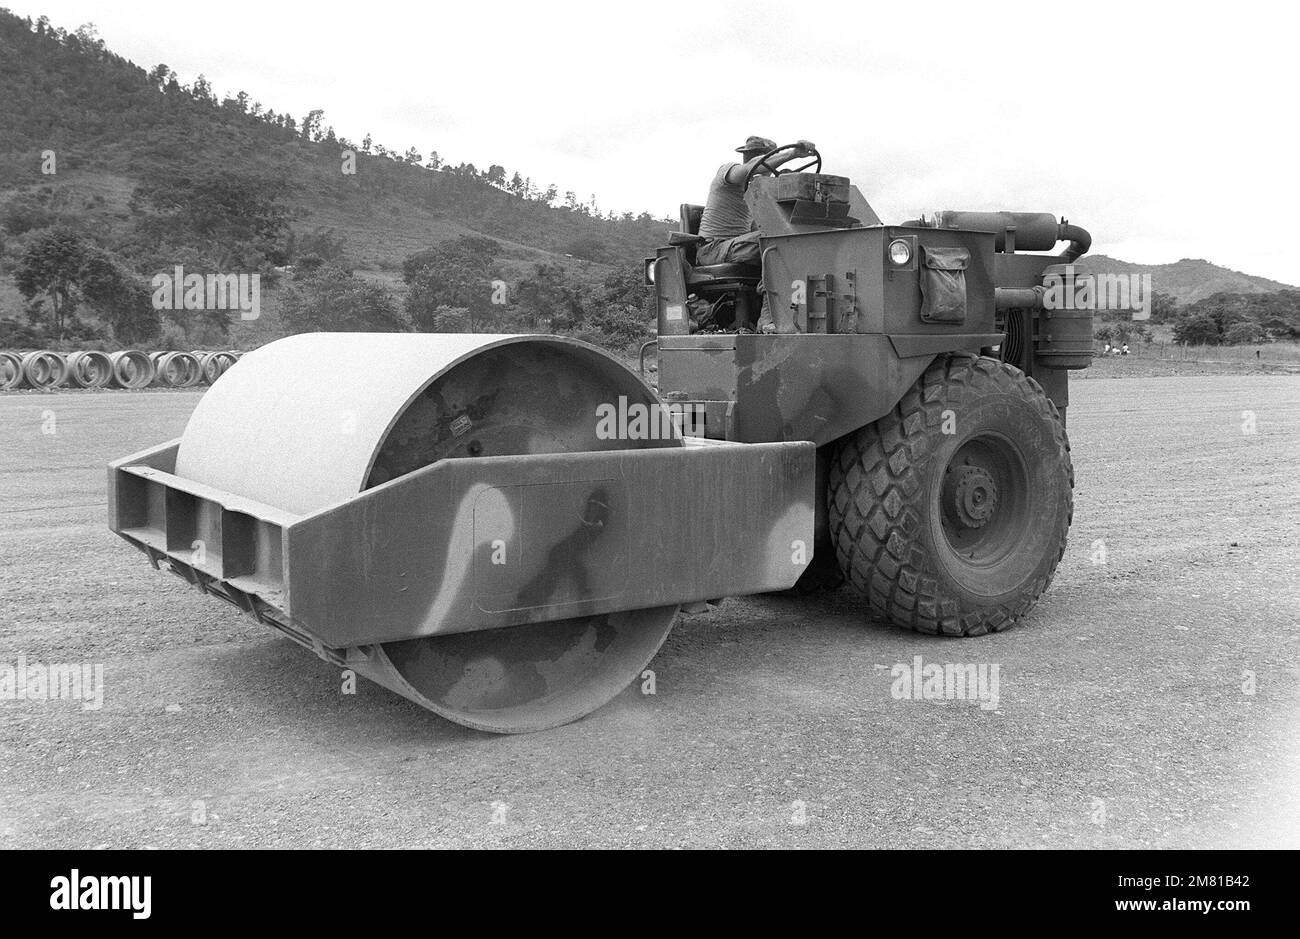 A steamroller is used by the 46th Engineers as they construct an airstrip during the AHUAS TARA II (BIG PINE) operation. Subject Operation/Series: AHUAS TARA II (BIG PINE) Base: Aguacate Country: Honduras (HND) Stock Photo